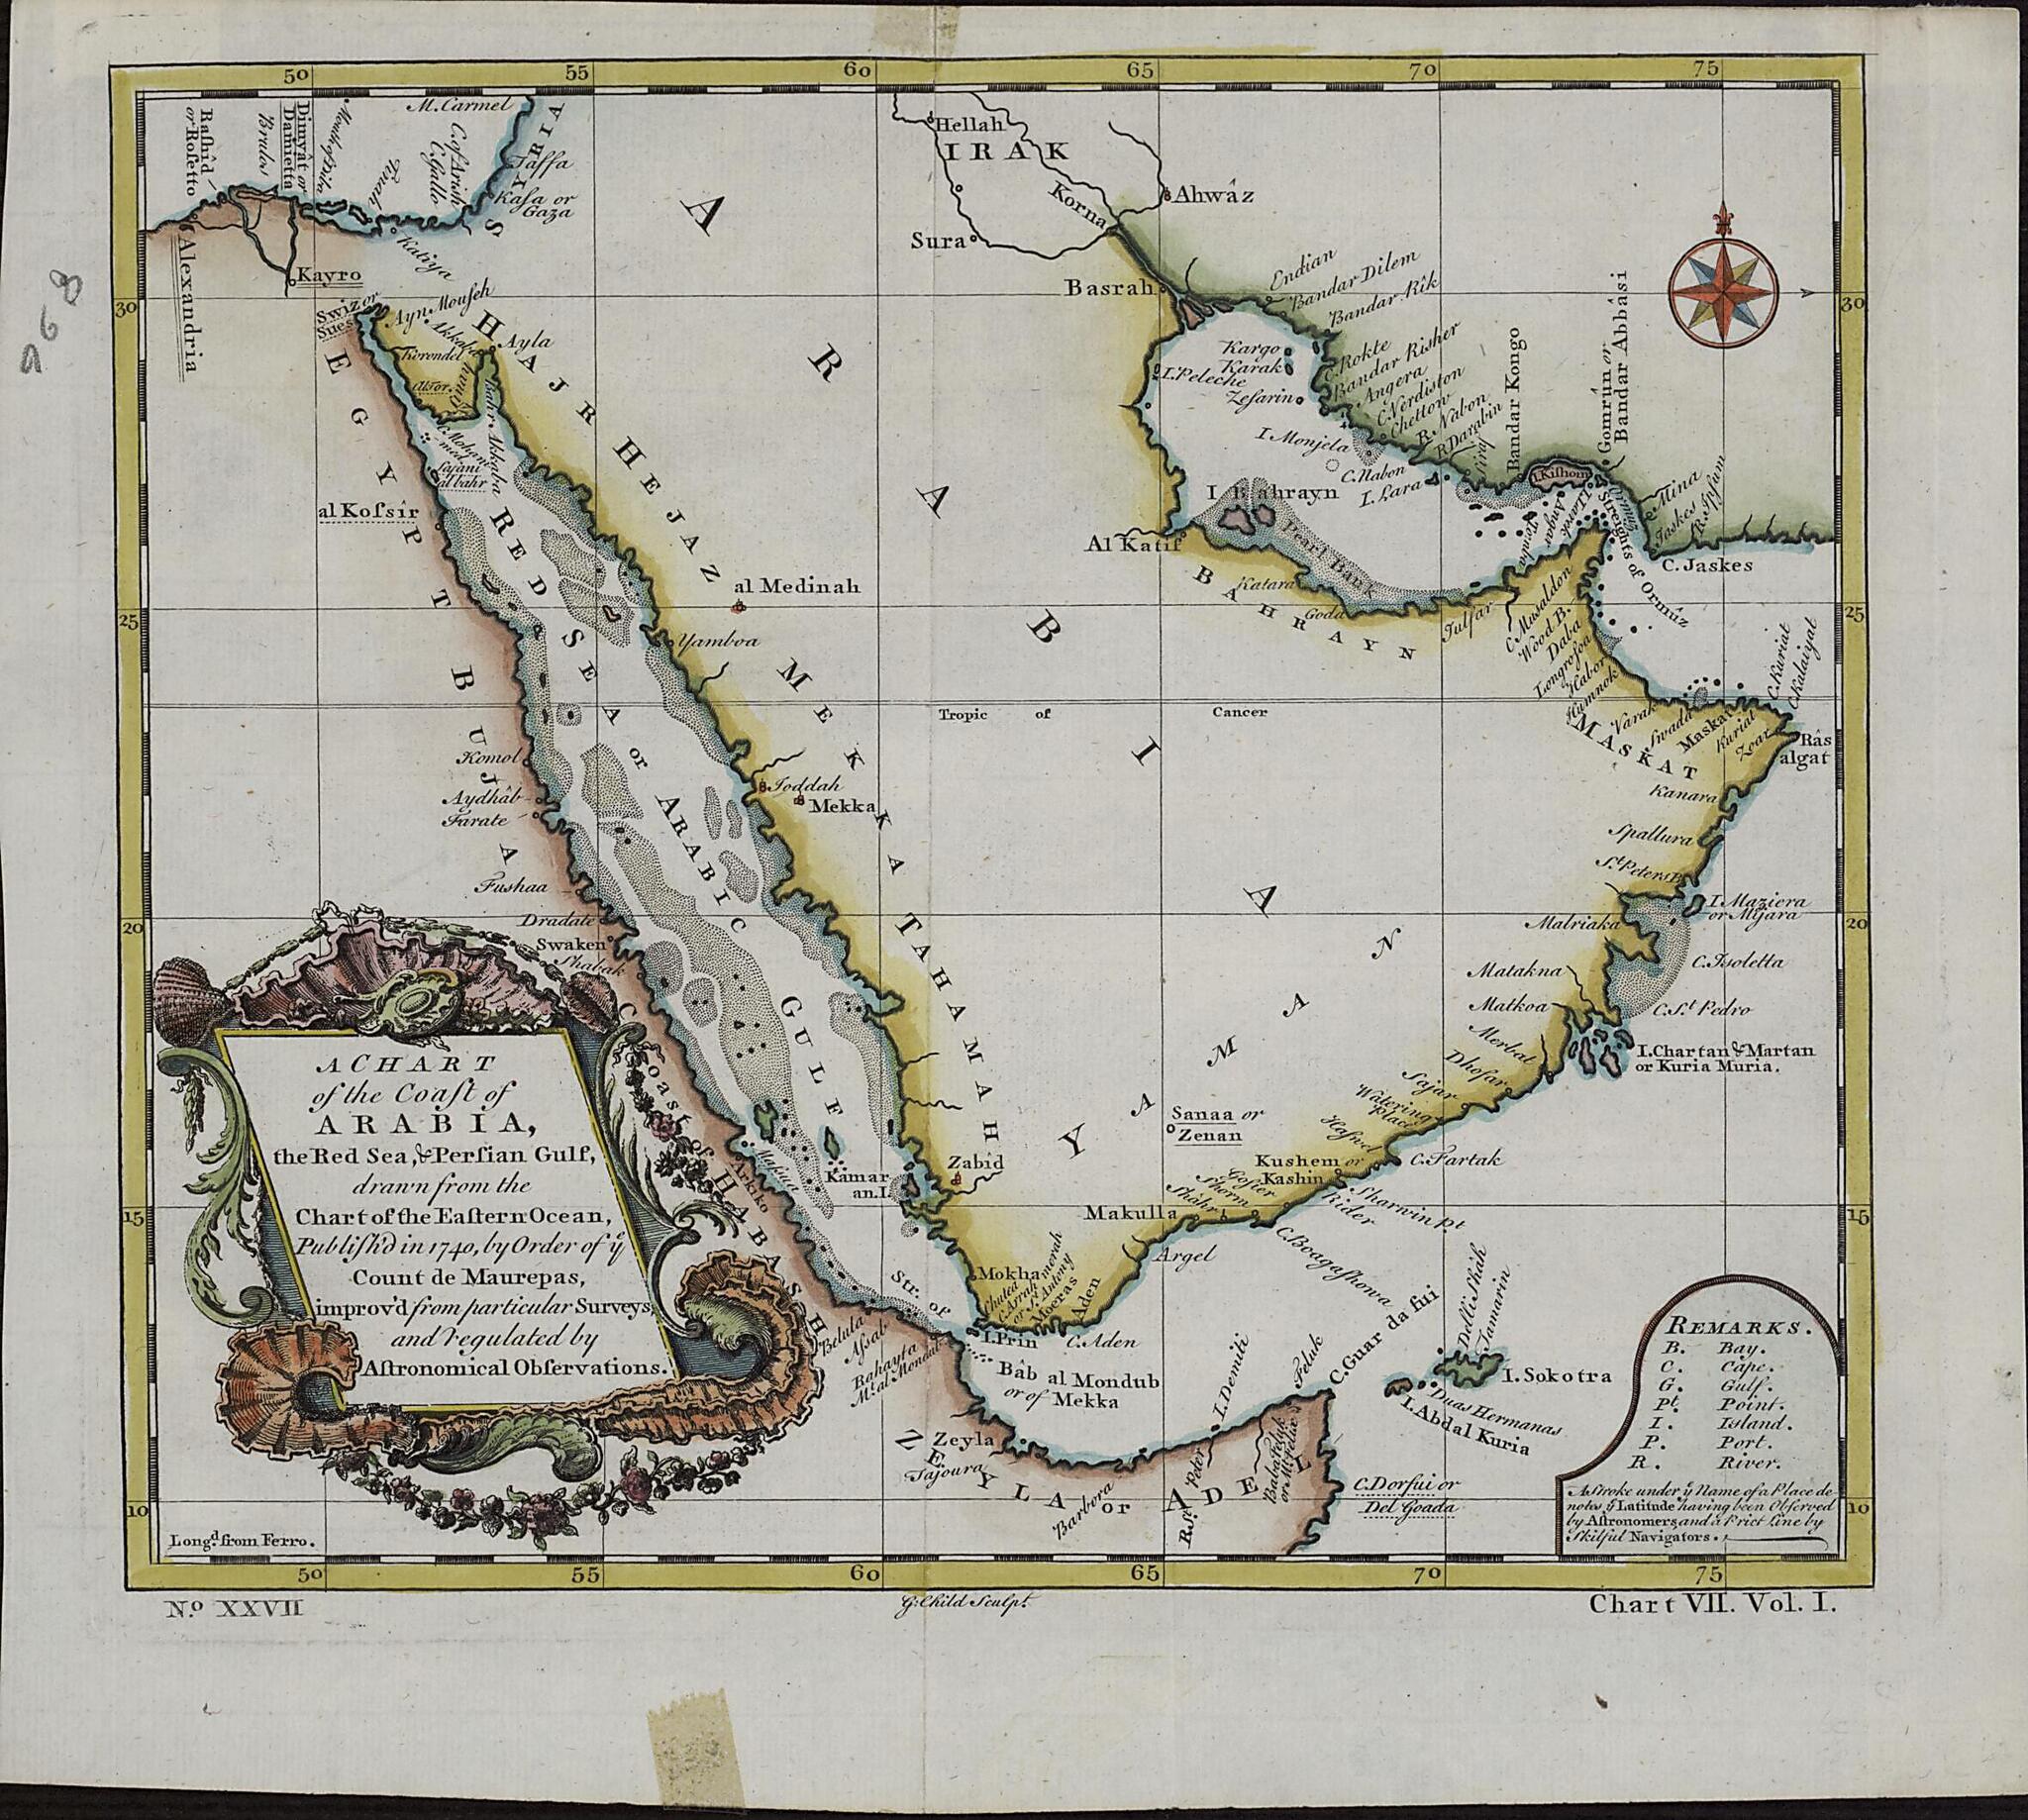 This old map of A Chart of the Coast of Arabia, the Red Sea and Persian Gulf, Drawn from the Chart of the Eastern Ocean from 1740 was created by G. Child in 1740